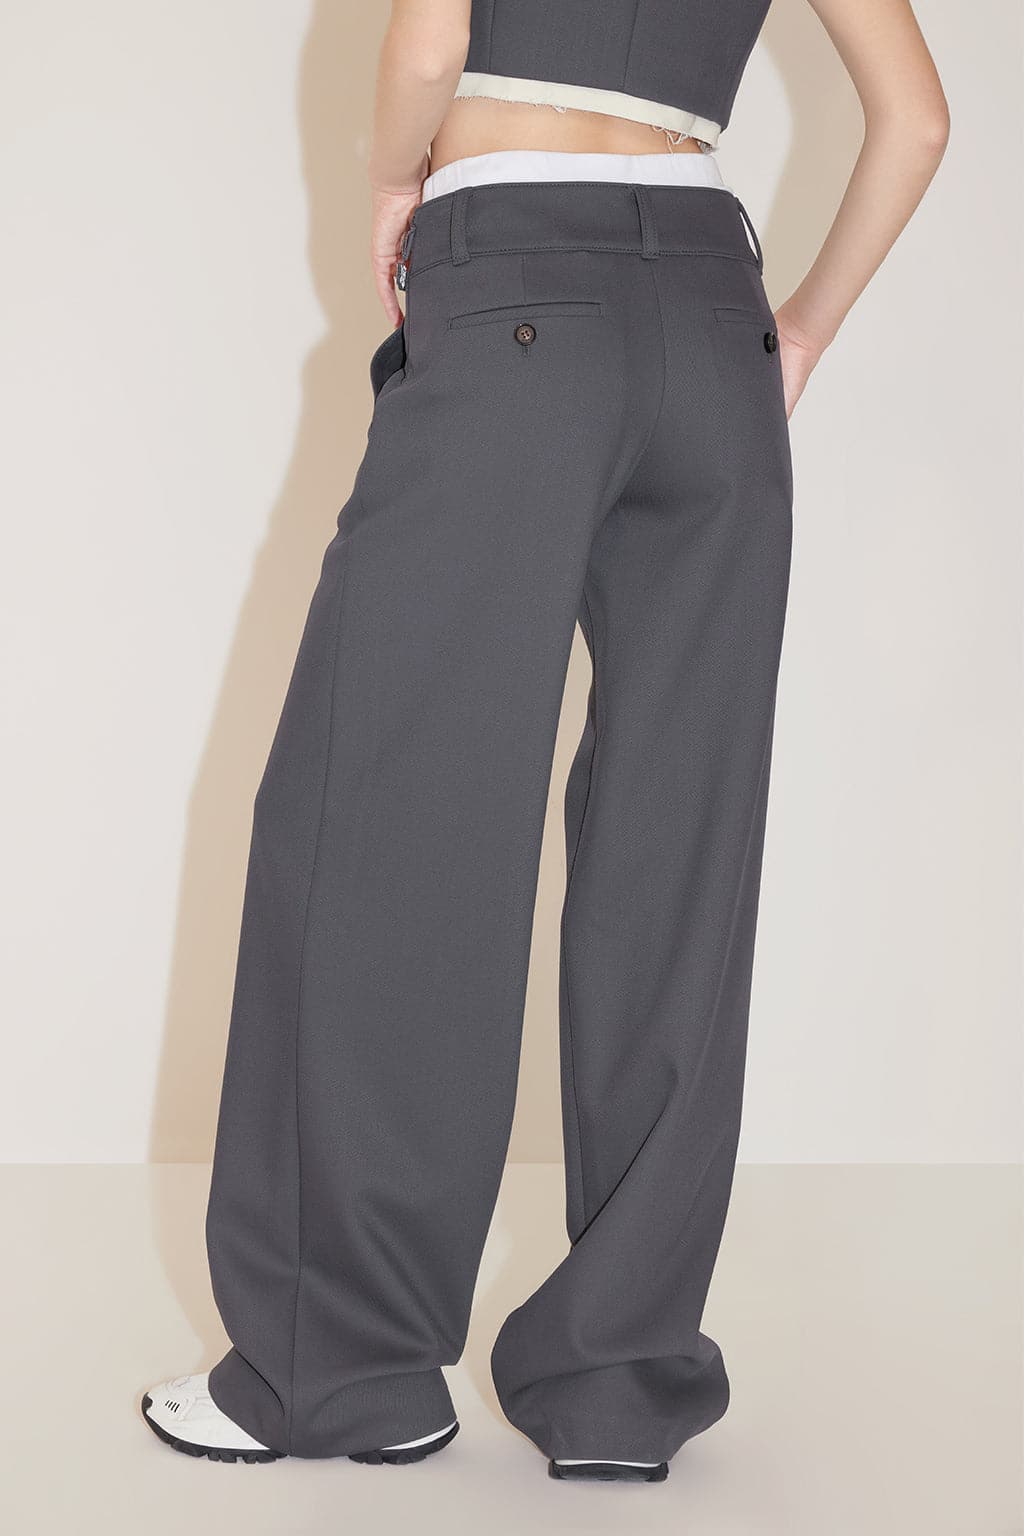 Pants & Jumpsuits - Miss Sixty Clothing And Accessories On Sale - Jessica  Westwood